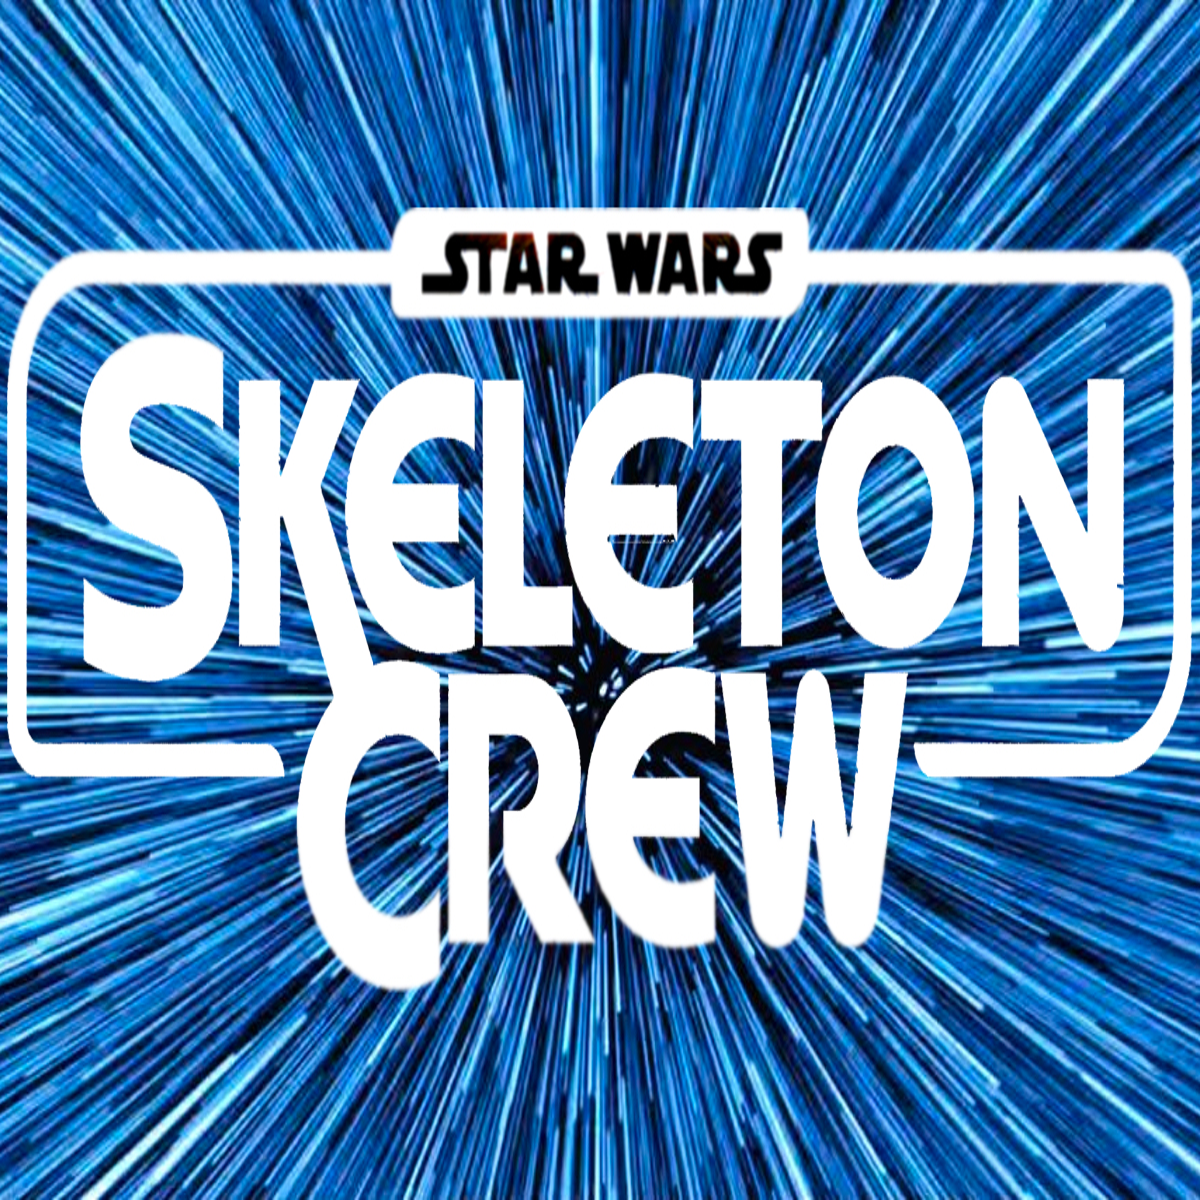 Star Wars upcoming TV and movies: Skeleton Crew, a growing Thrawn